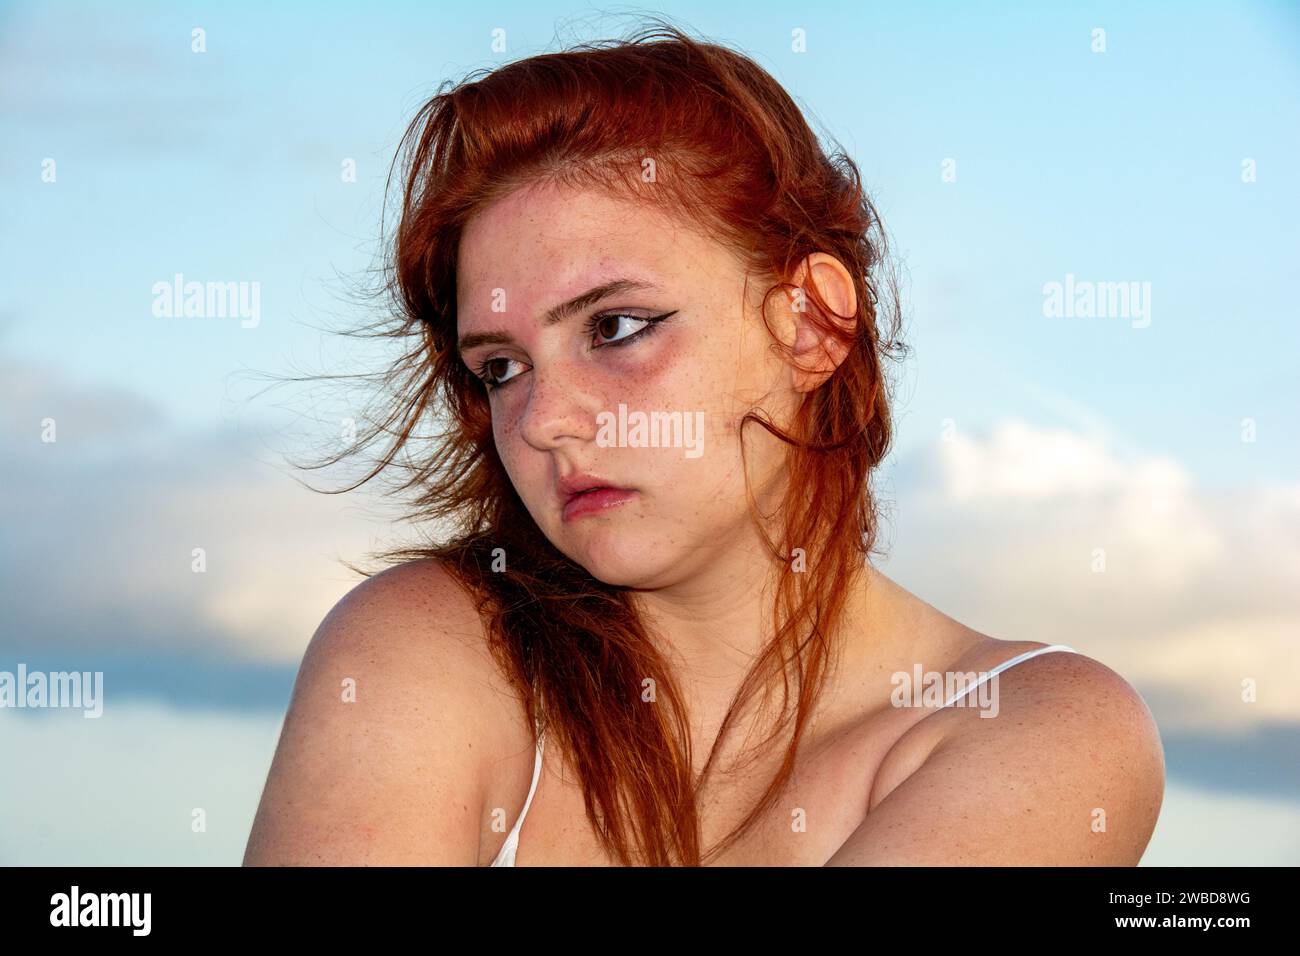 Portrait of a young girl with red hair, blue sky and clouds, hair tousled by the wind Stock Photo